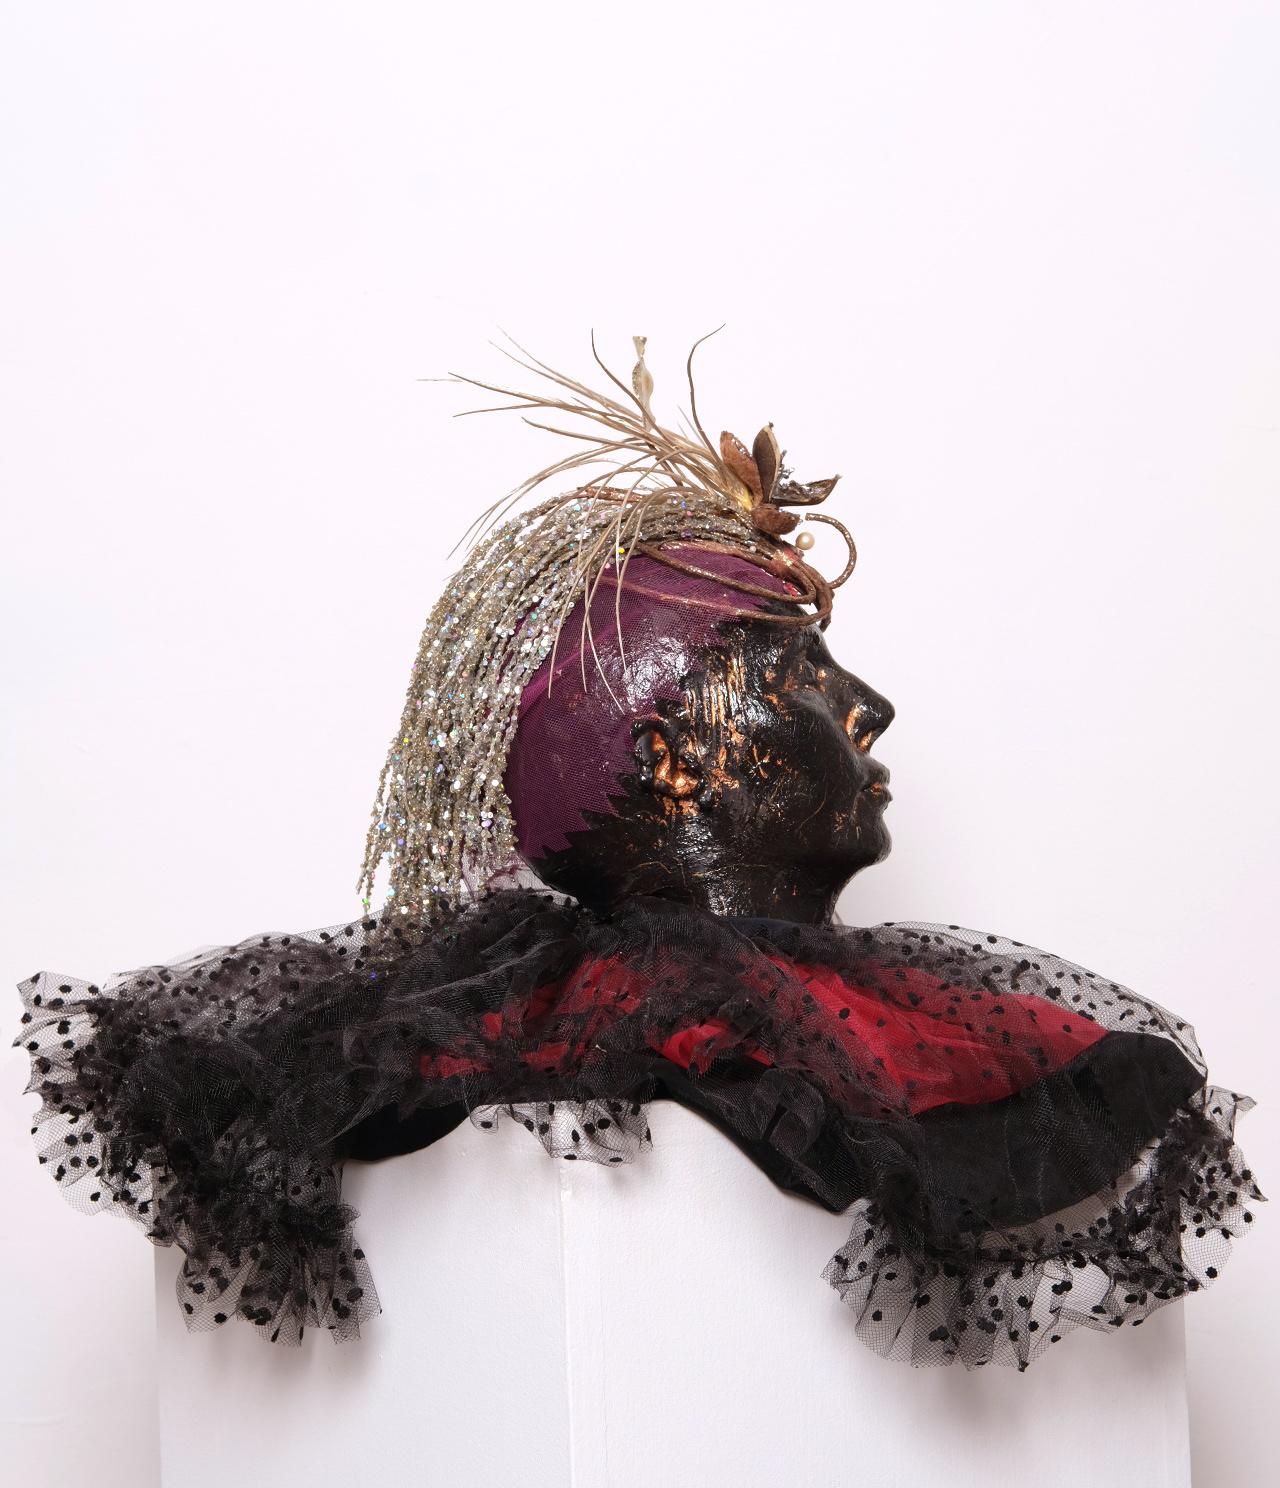 CREST - sculpture with fabric and headdress - Sculpture by Kymia Nawabi